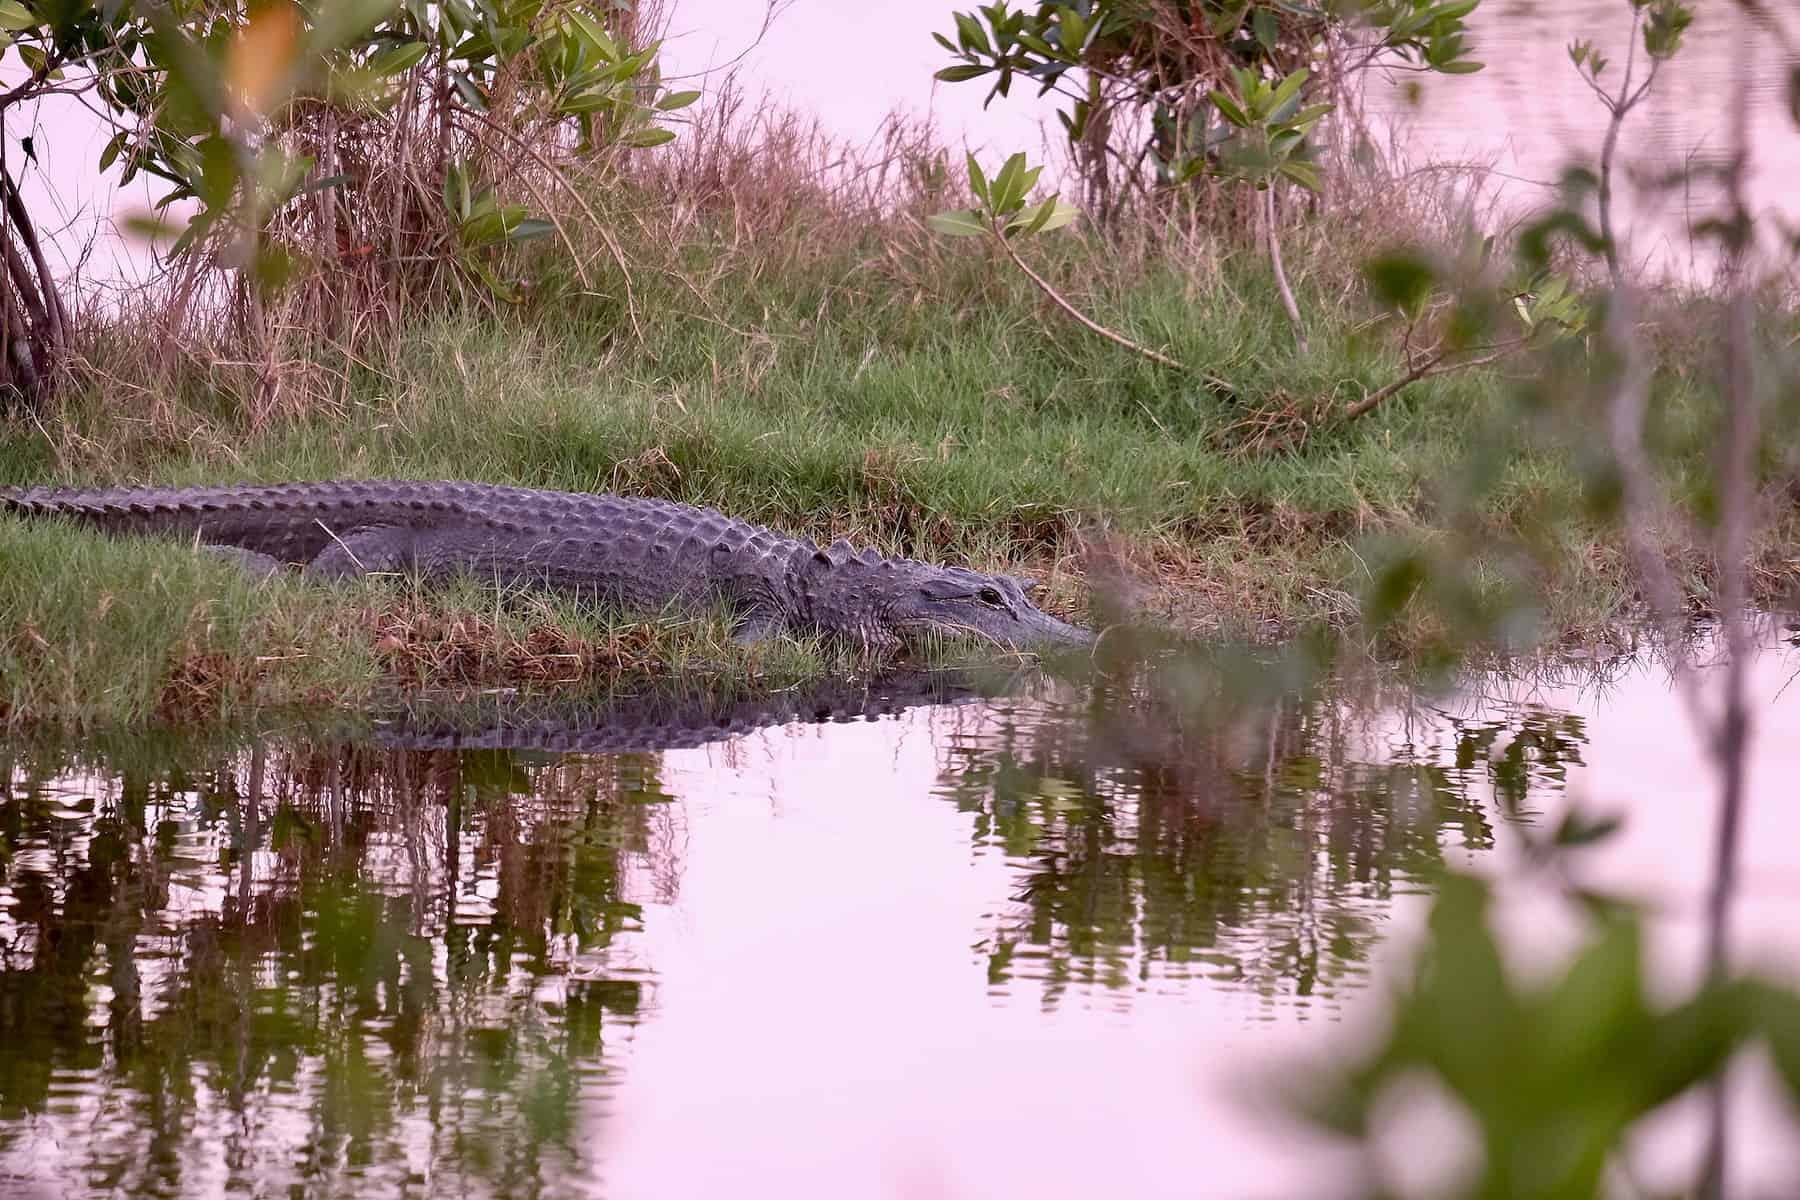 everglades national park tours from fort lauderdale